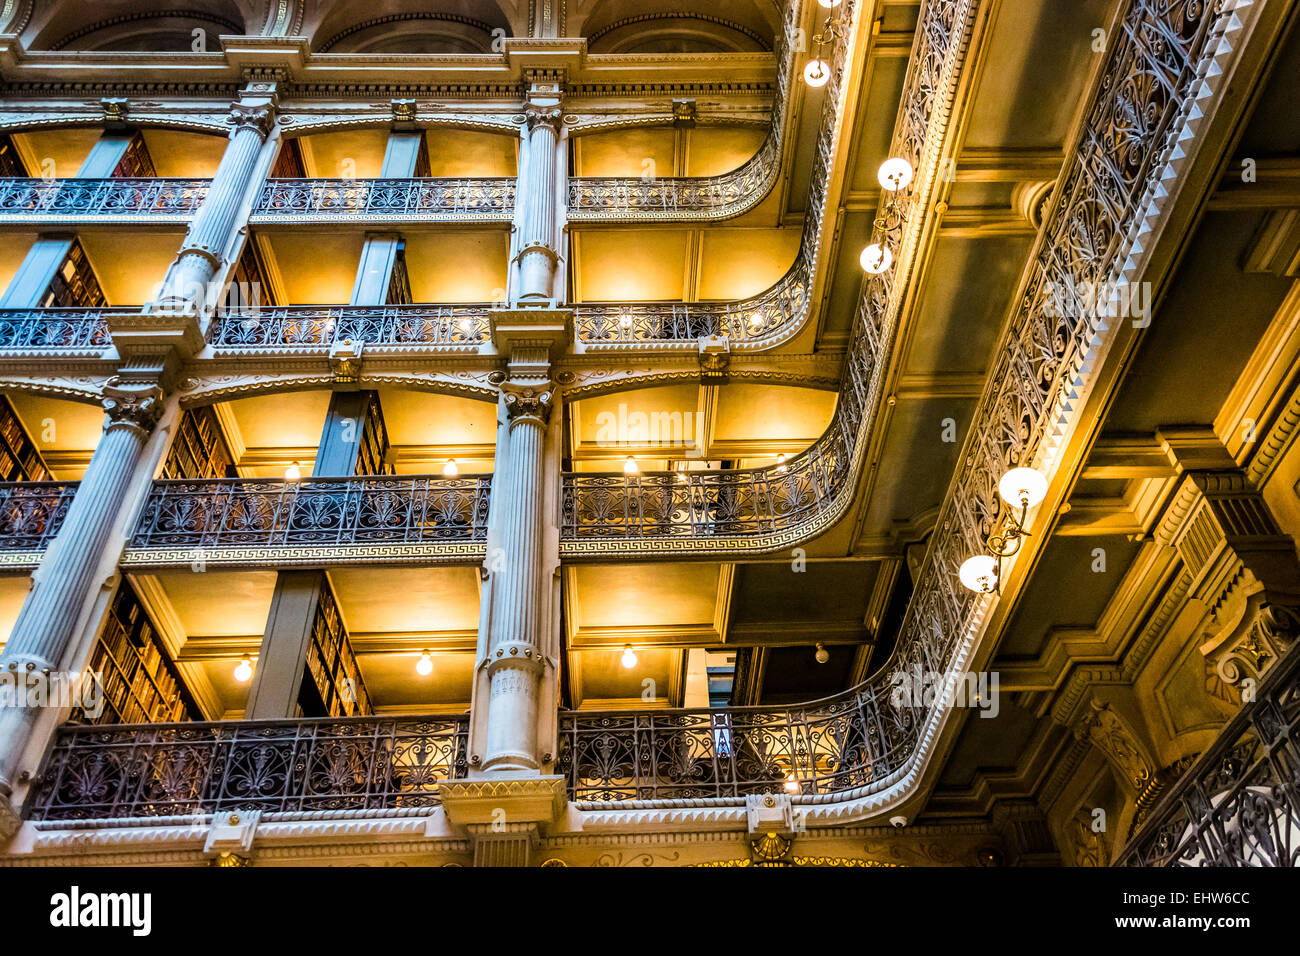 BALTIMORE - JUNE 13: The interior of the Peabody Library on June 13, 2014 in Baltimore, Maryland. The Peabody Library is a resea Stock Photo